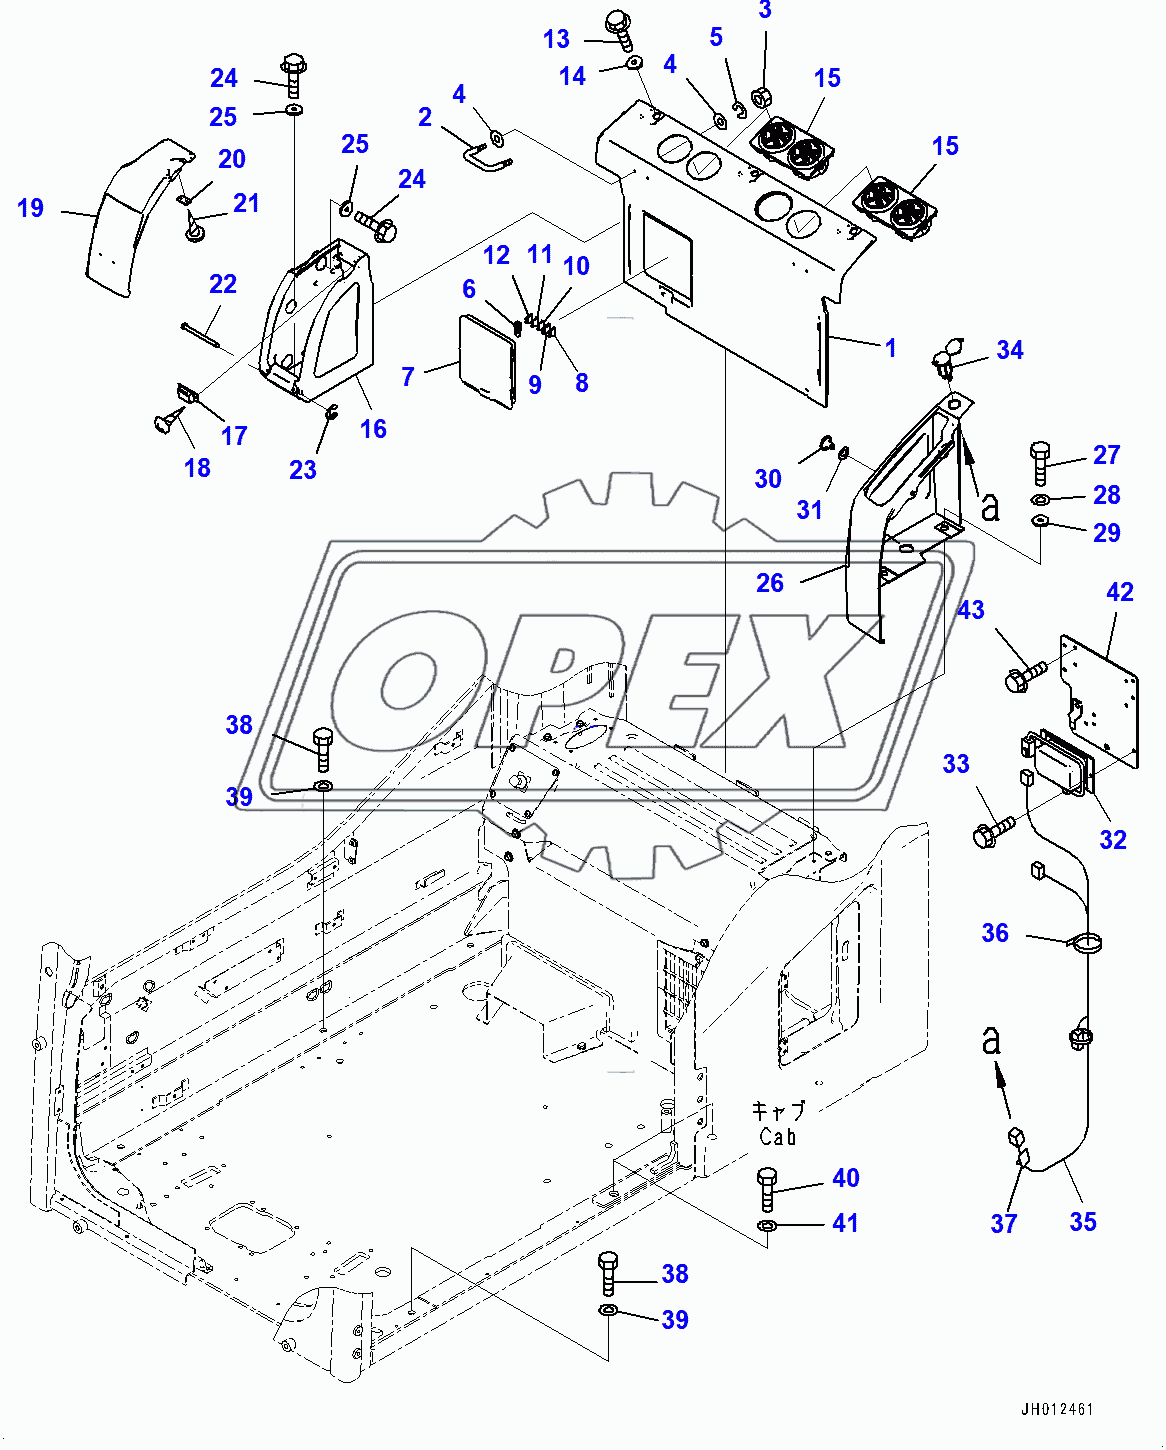  Cab, Cab In Parts, Rear Cover, With 12V Converter (400001-)